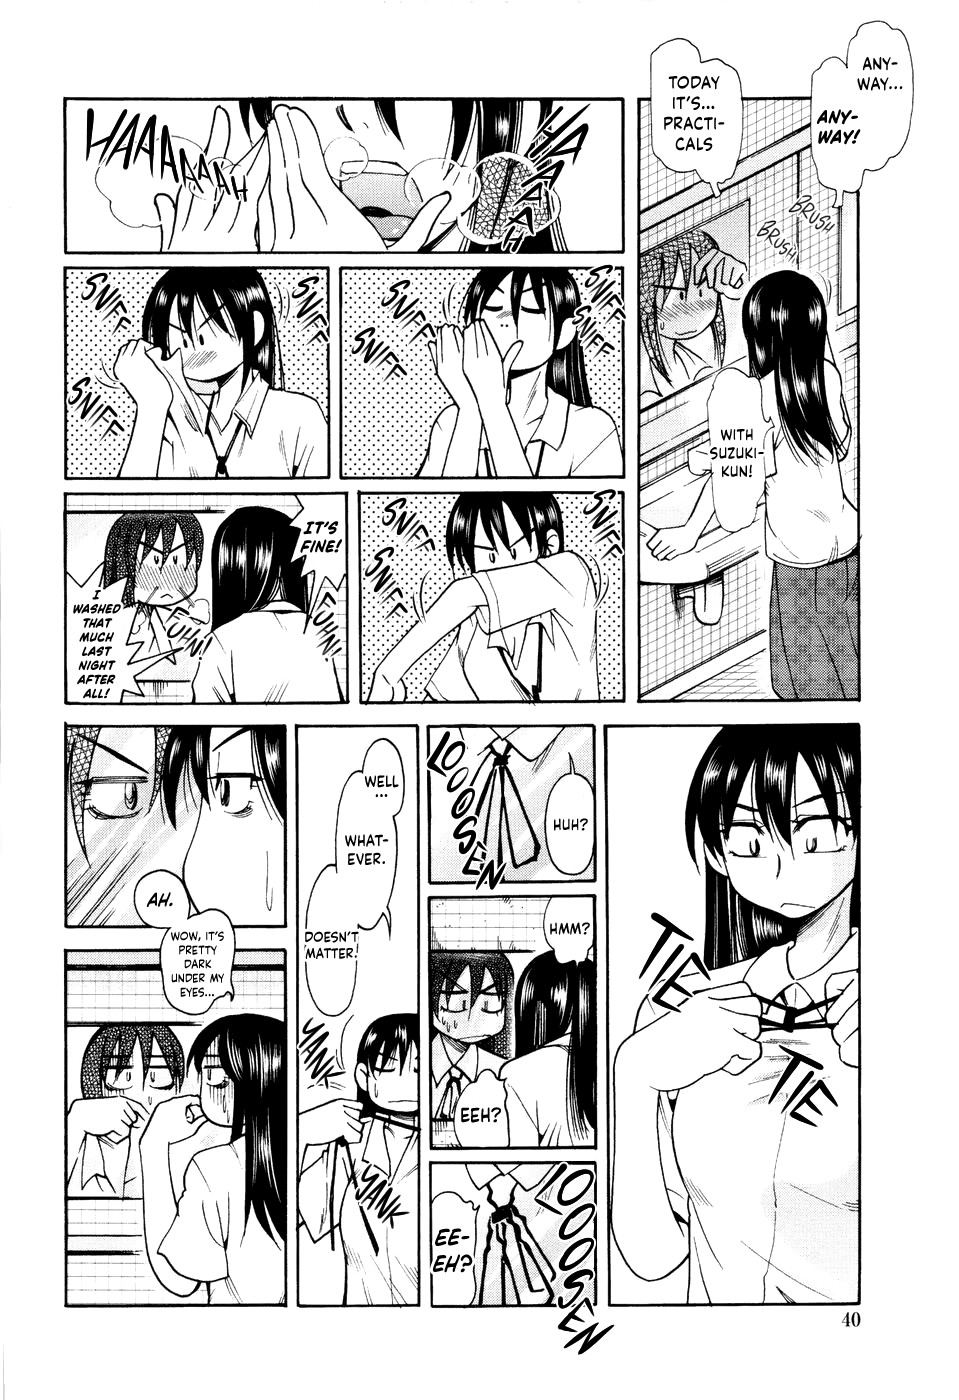 Hentai Manga Comic-Love Dere - It Is Crazy About Love.-Chapter 3-5-2